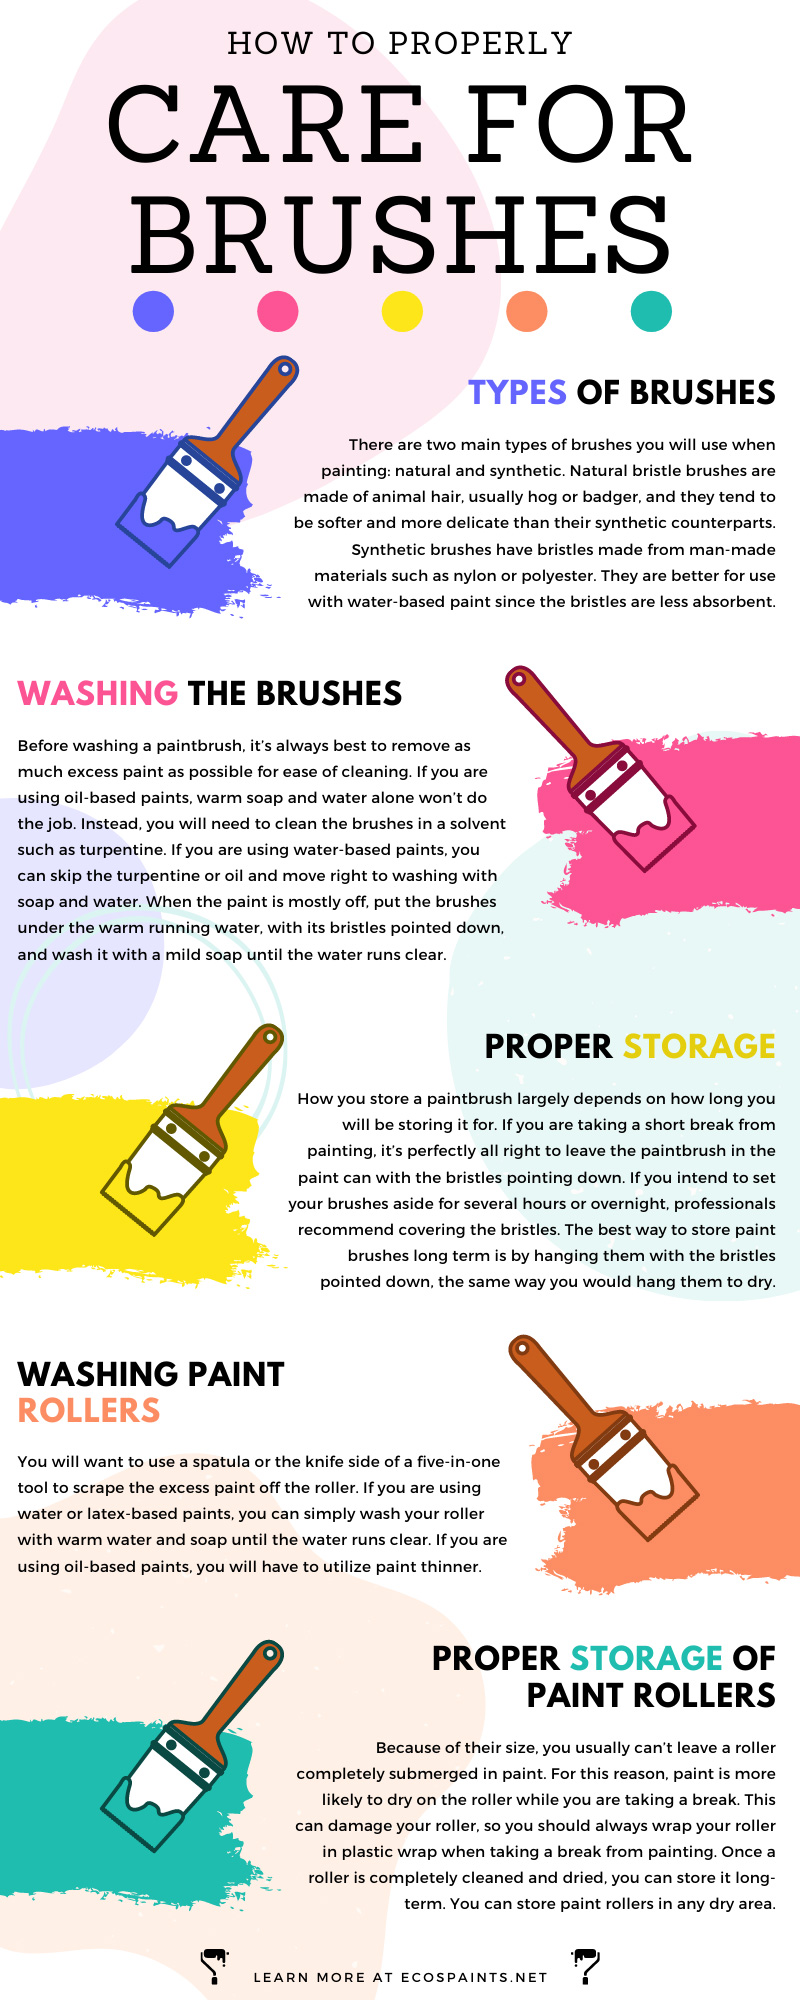 How To Properly Care for Brushes